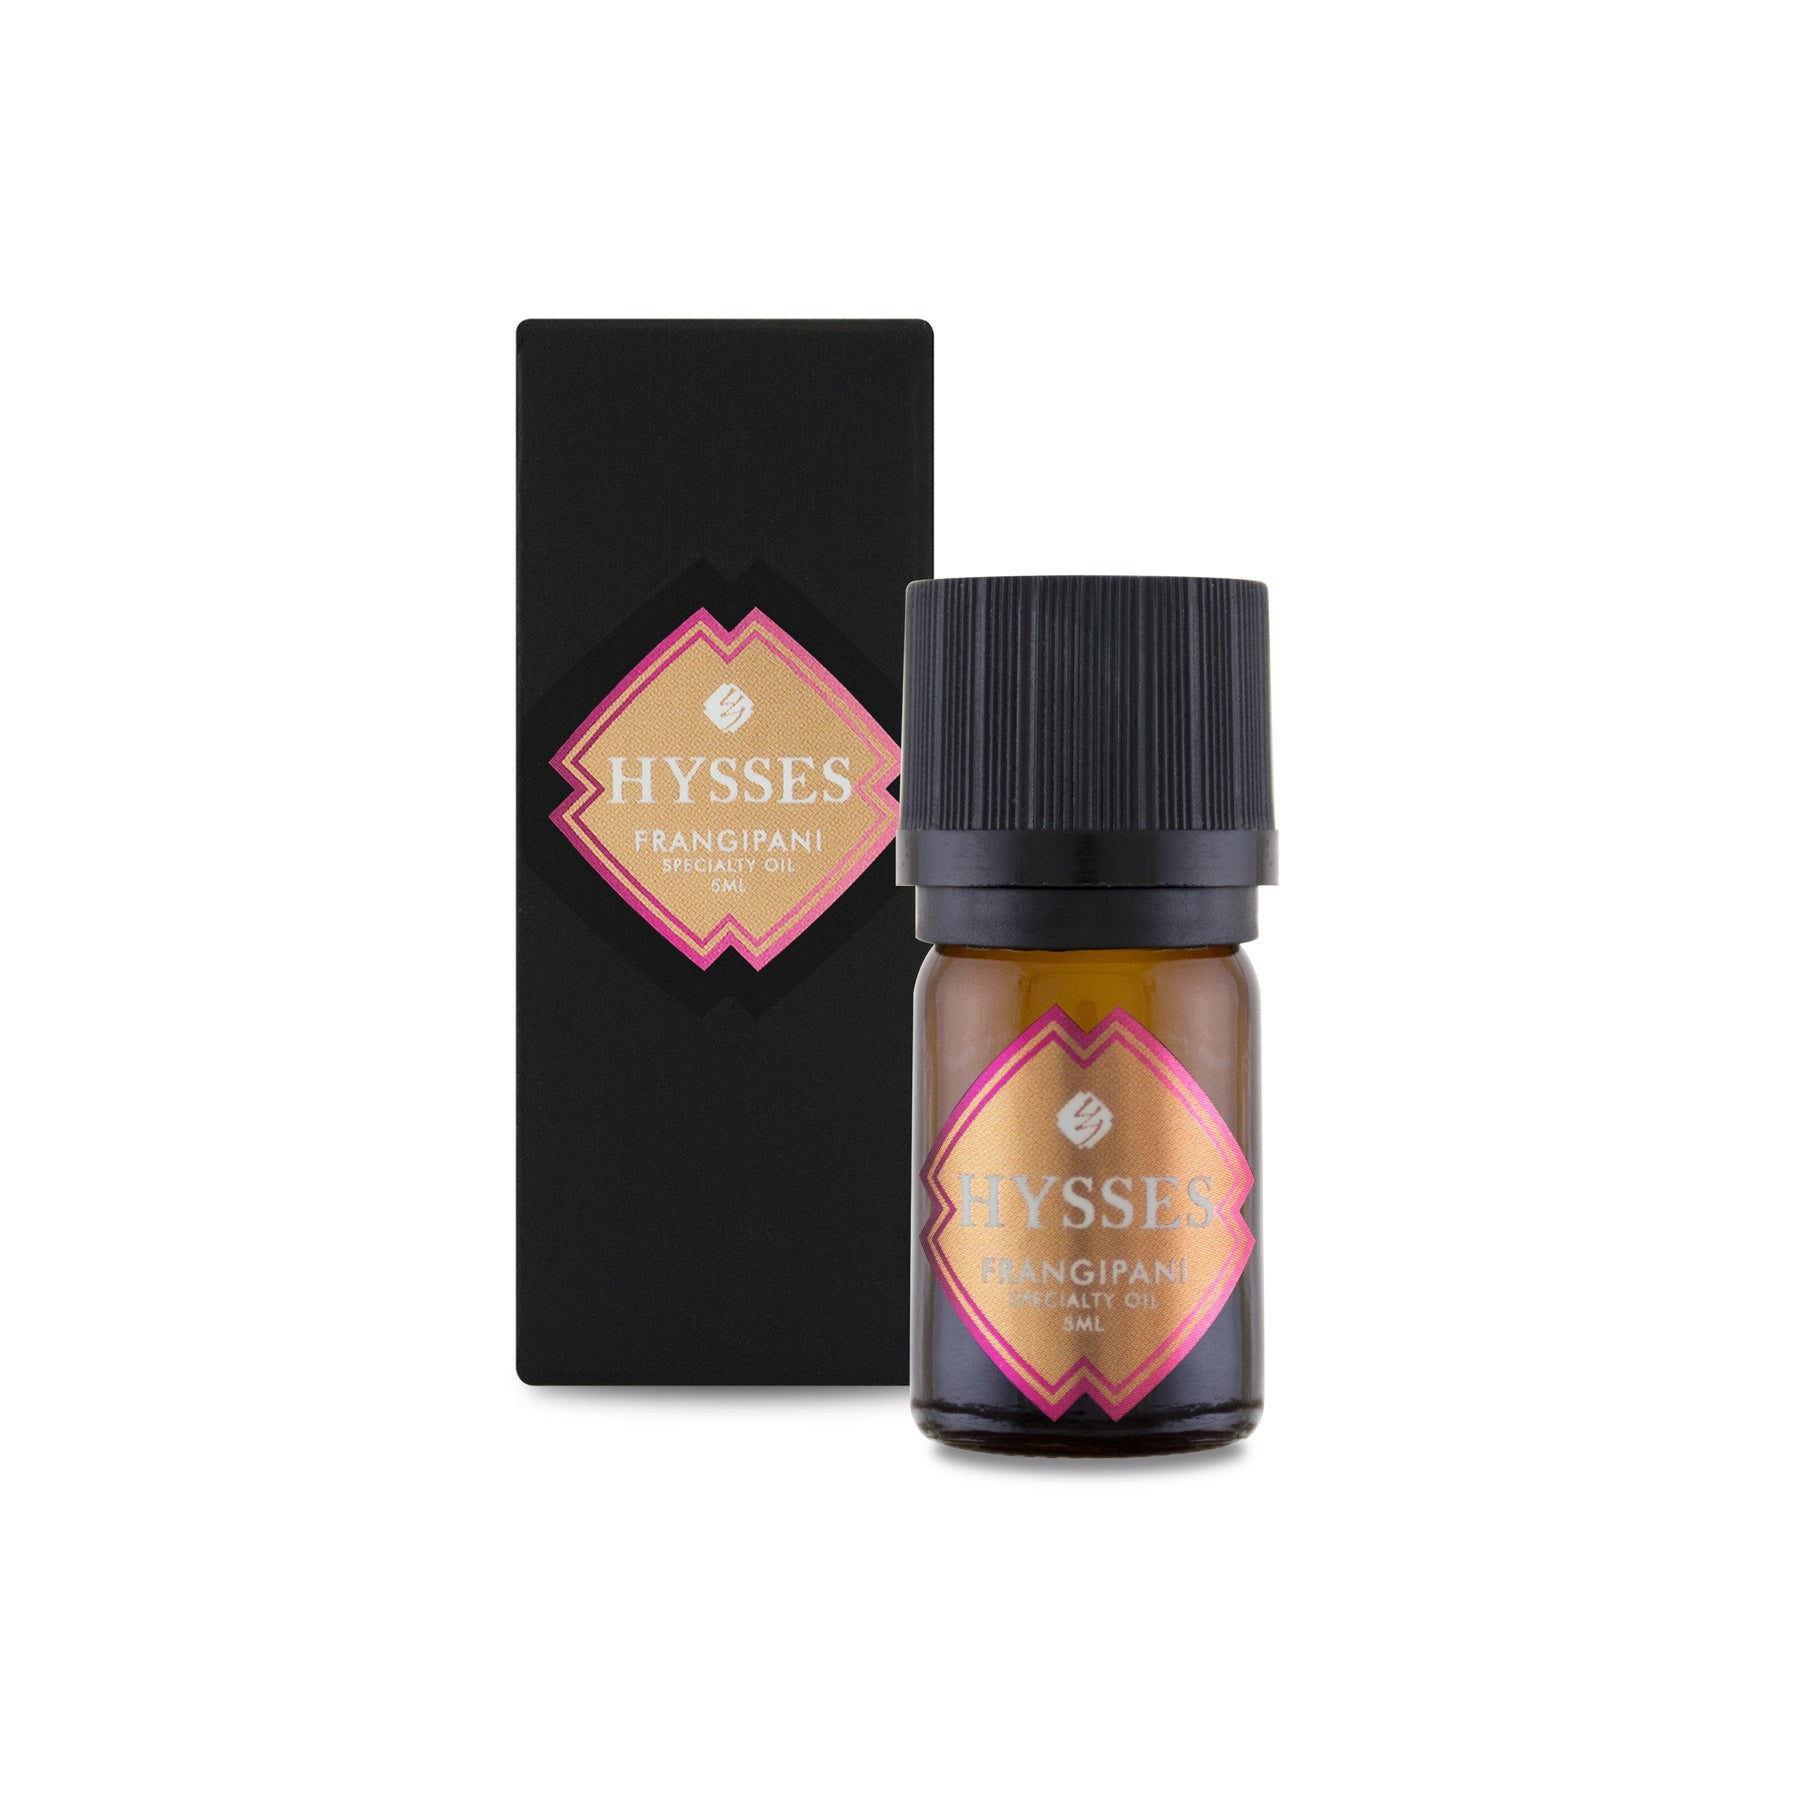 Frangipani Absolute (25%) Specialty Oil - HYSSES